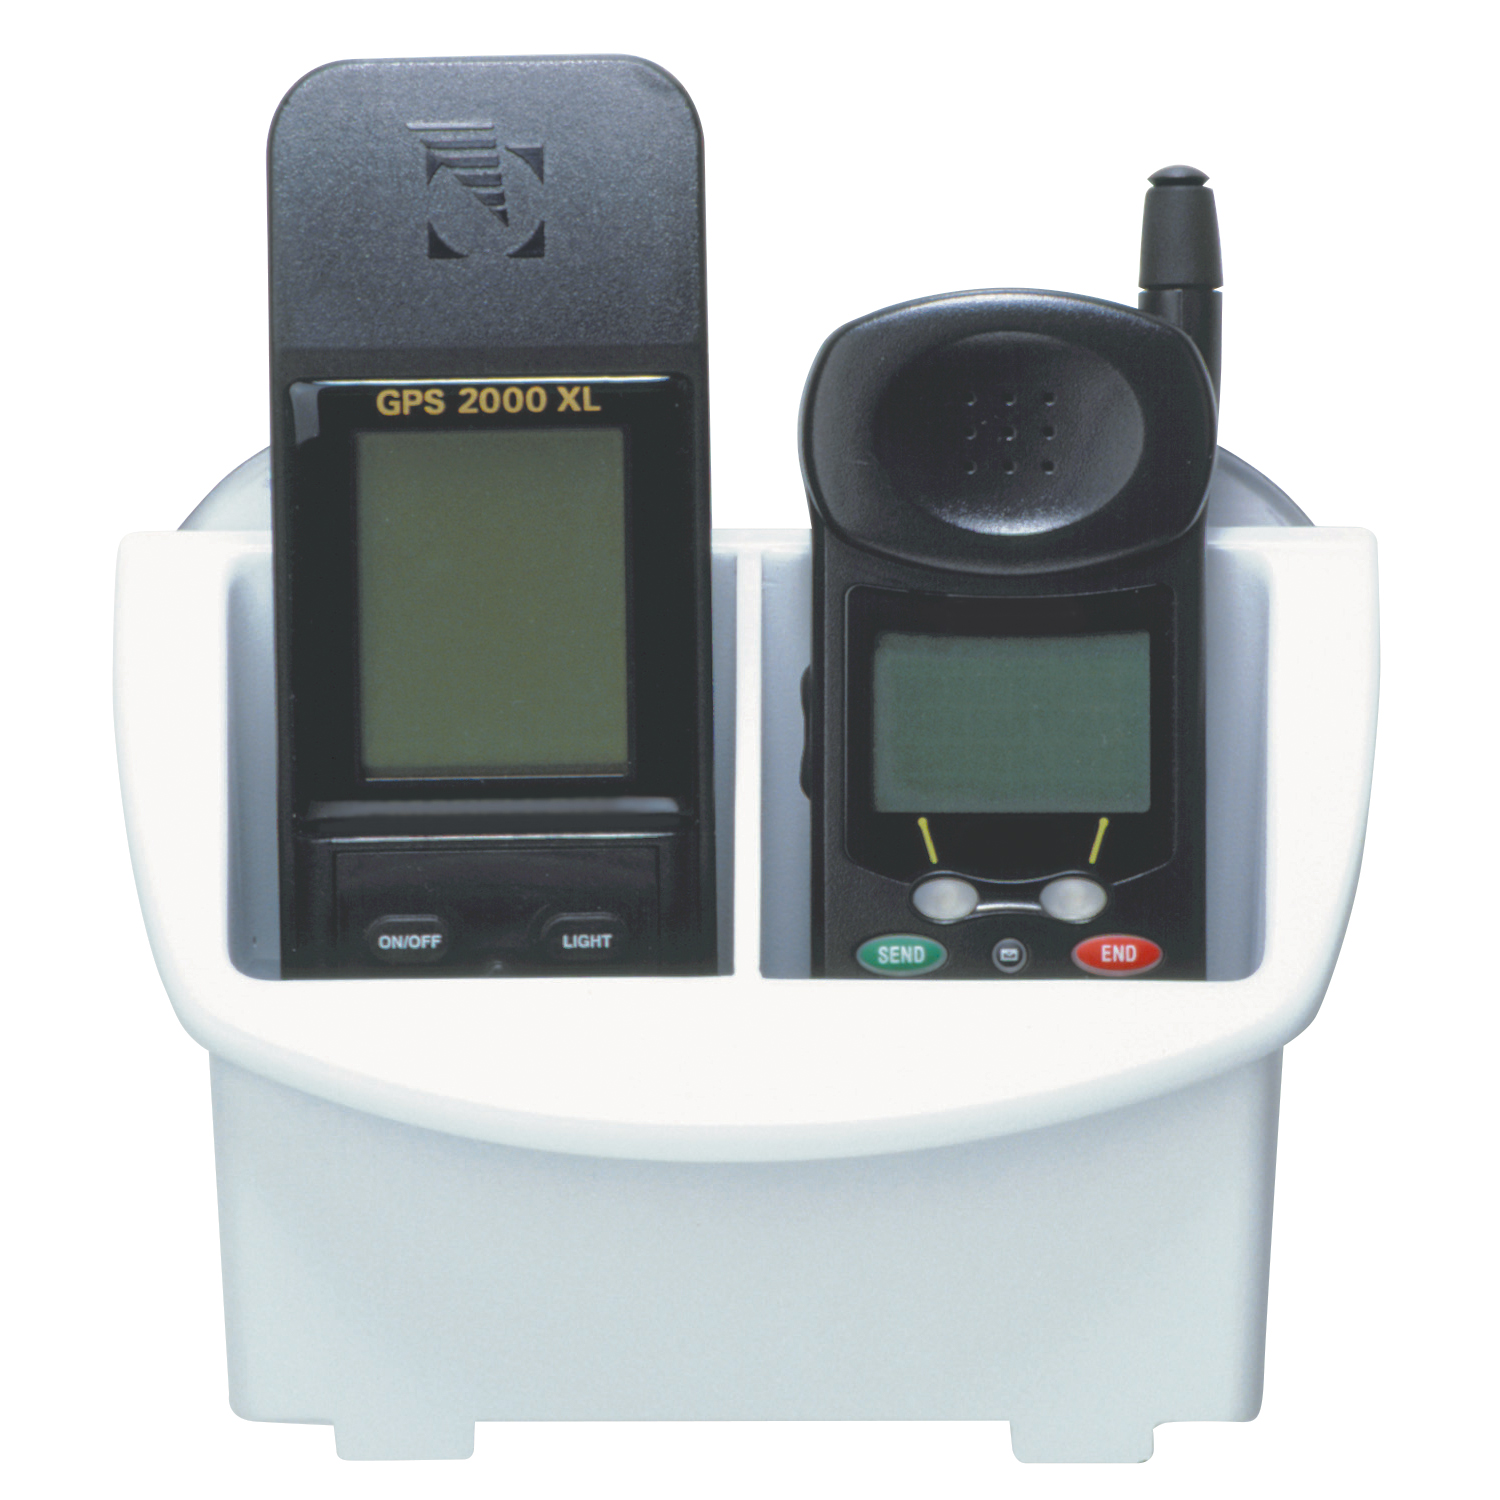 BoatMates Nautical Storage Solutions GPS/Cell Phone Caddy, White